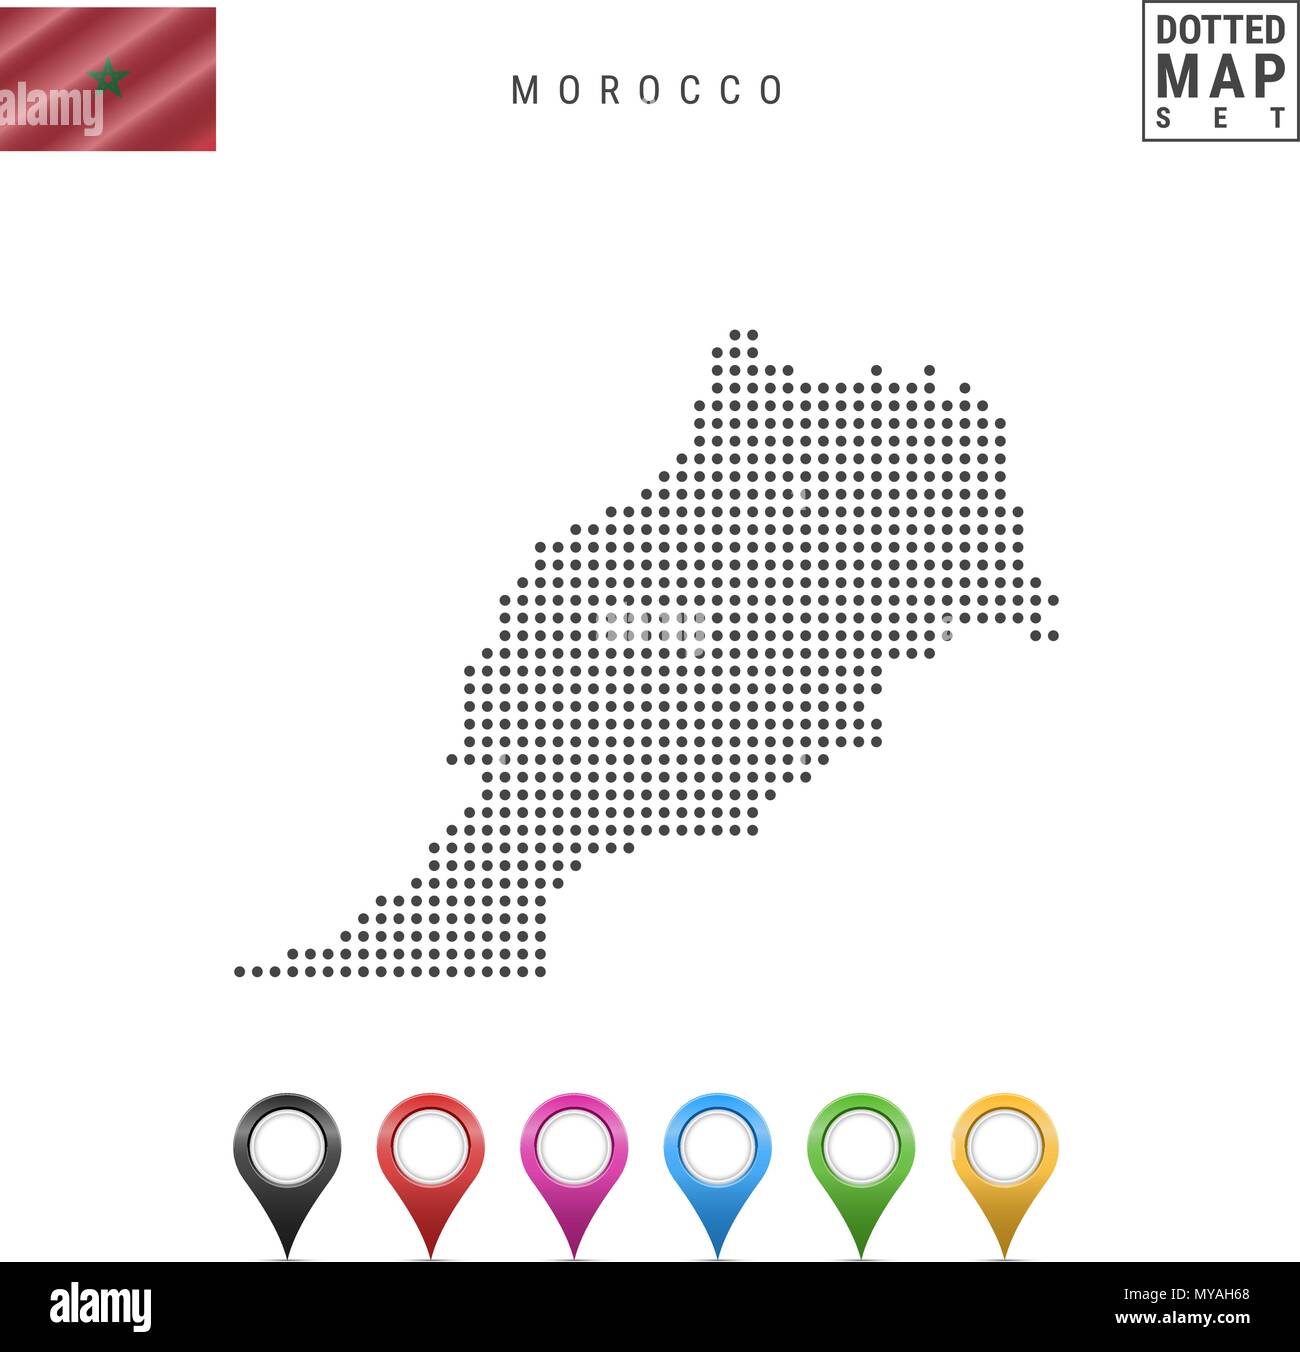 Vector Dotted Map of Morocco. Simple Silhouette of Morocco. National Flag of Morocco. Set of Multicolored Map Markers Stock Vector